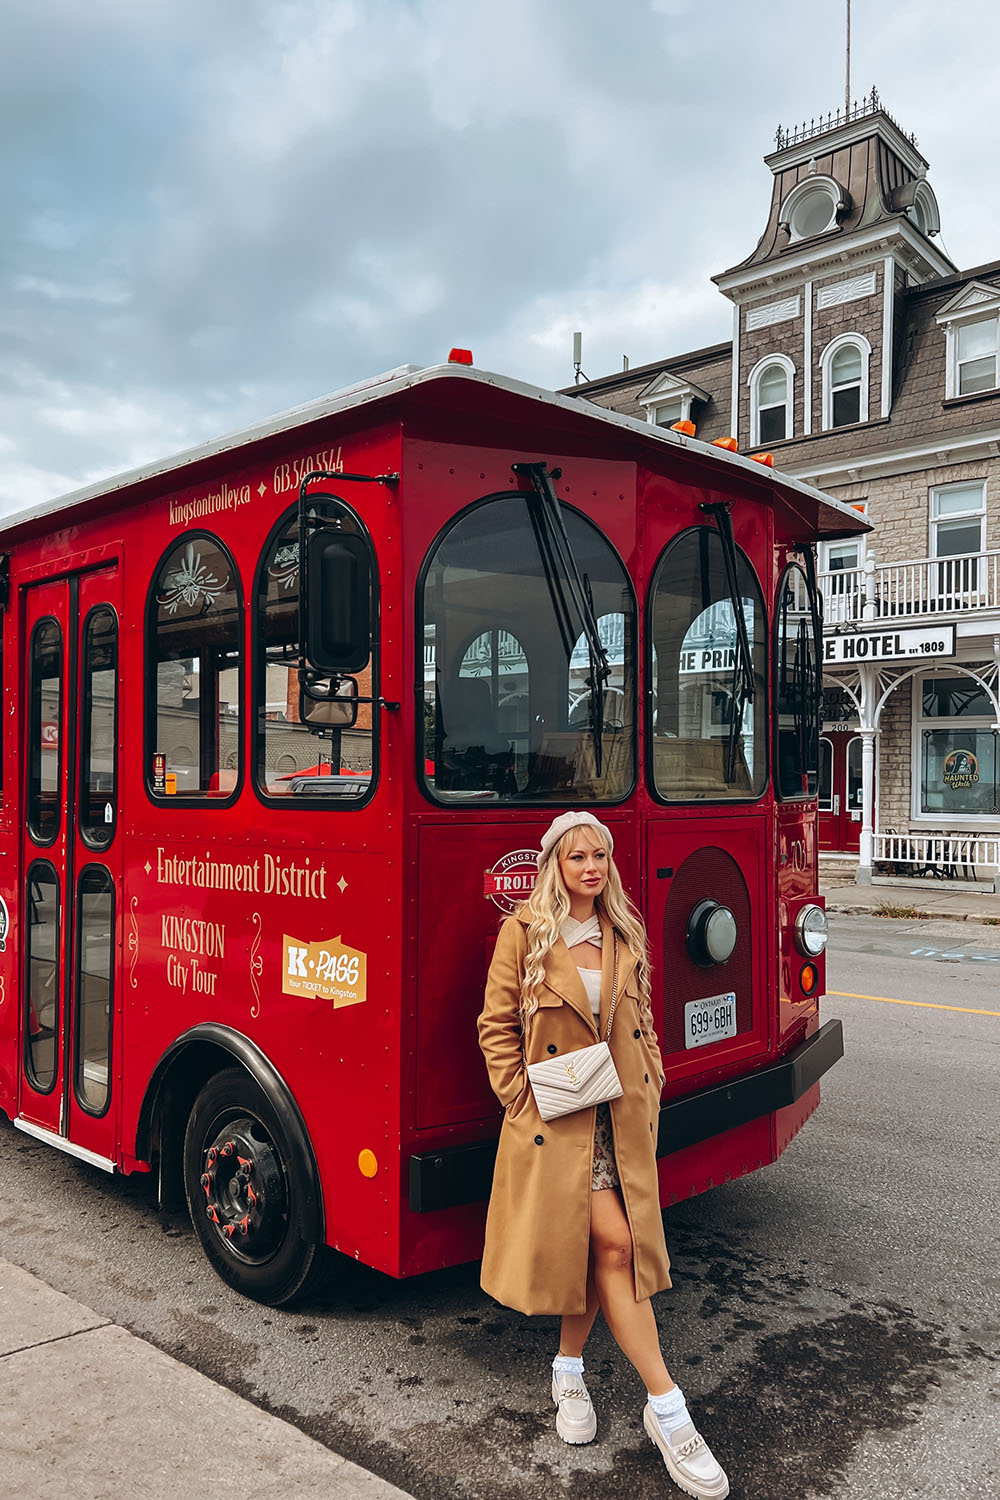 Planning a trip to Kingston, Ontario soon? This guide to the best things to do in Kingston is for you! From the top Kingston activities and attractions, to the must see sights, best restaurants, bars, and everything in between. You won’t want to miss this guide that will help you plan your perfect Kingston getaway. Pictured here: The Kingston Red Trolley Tour